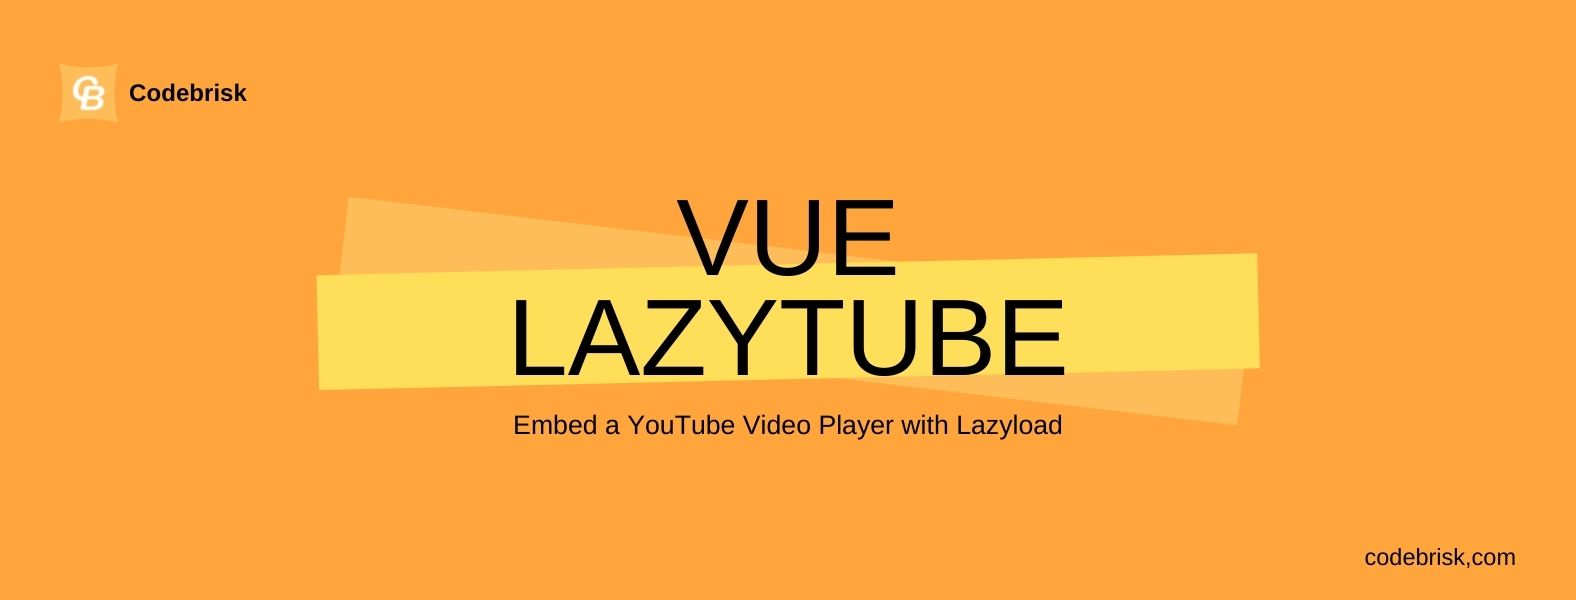 Vue Lazytube - Embed a YouTube Video Player with Lazyload